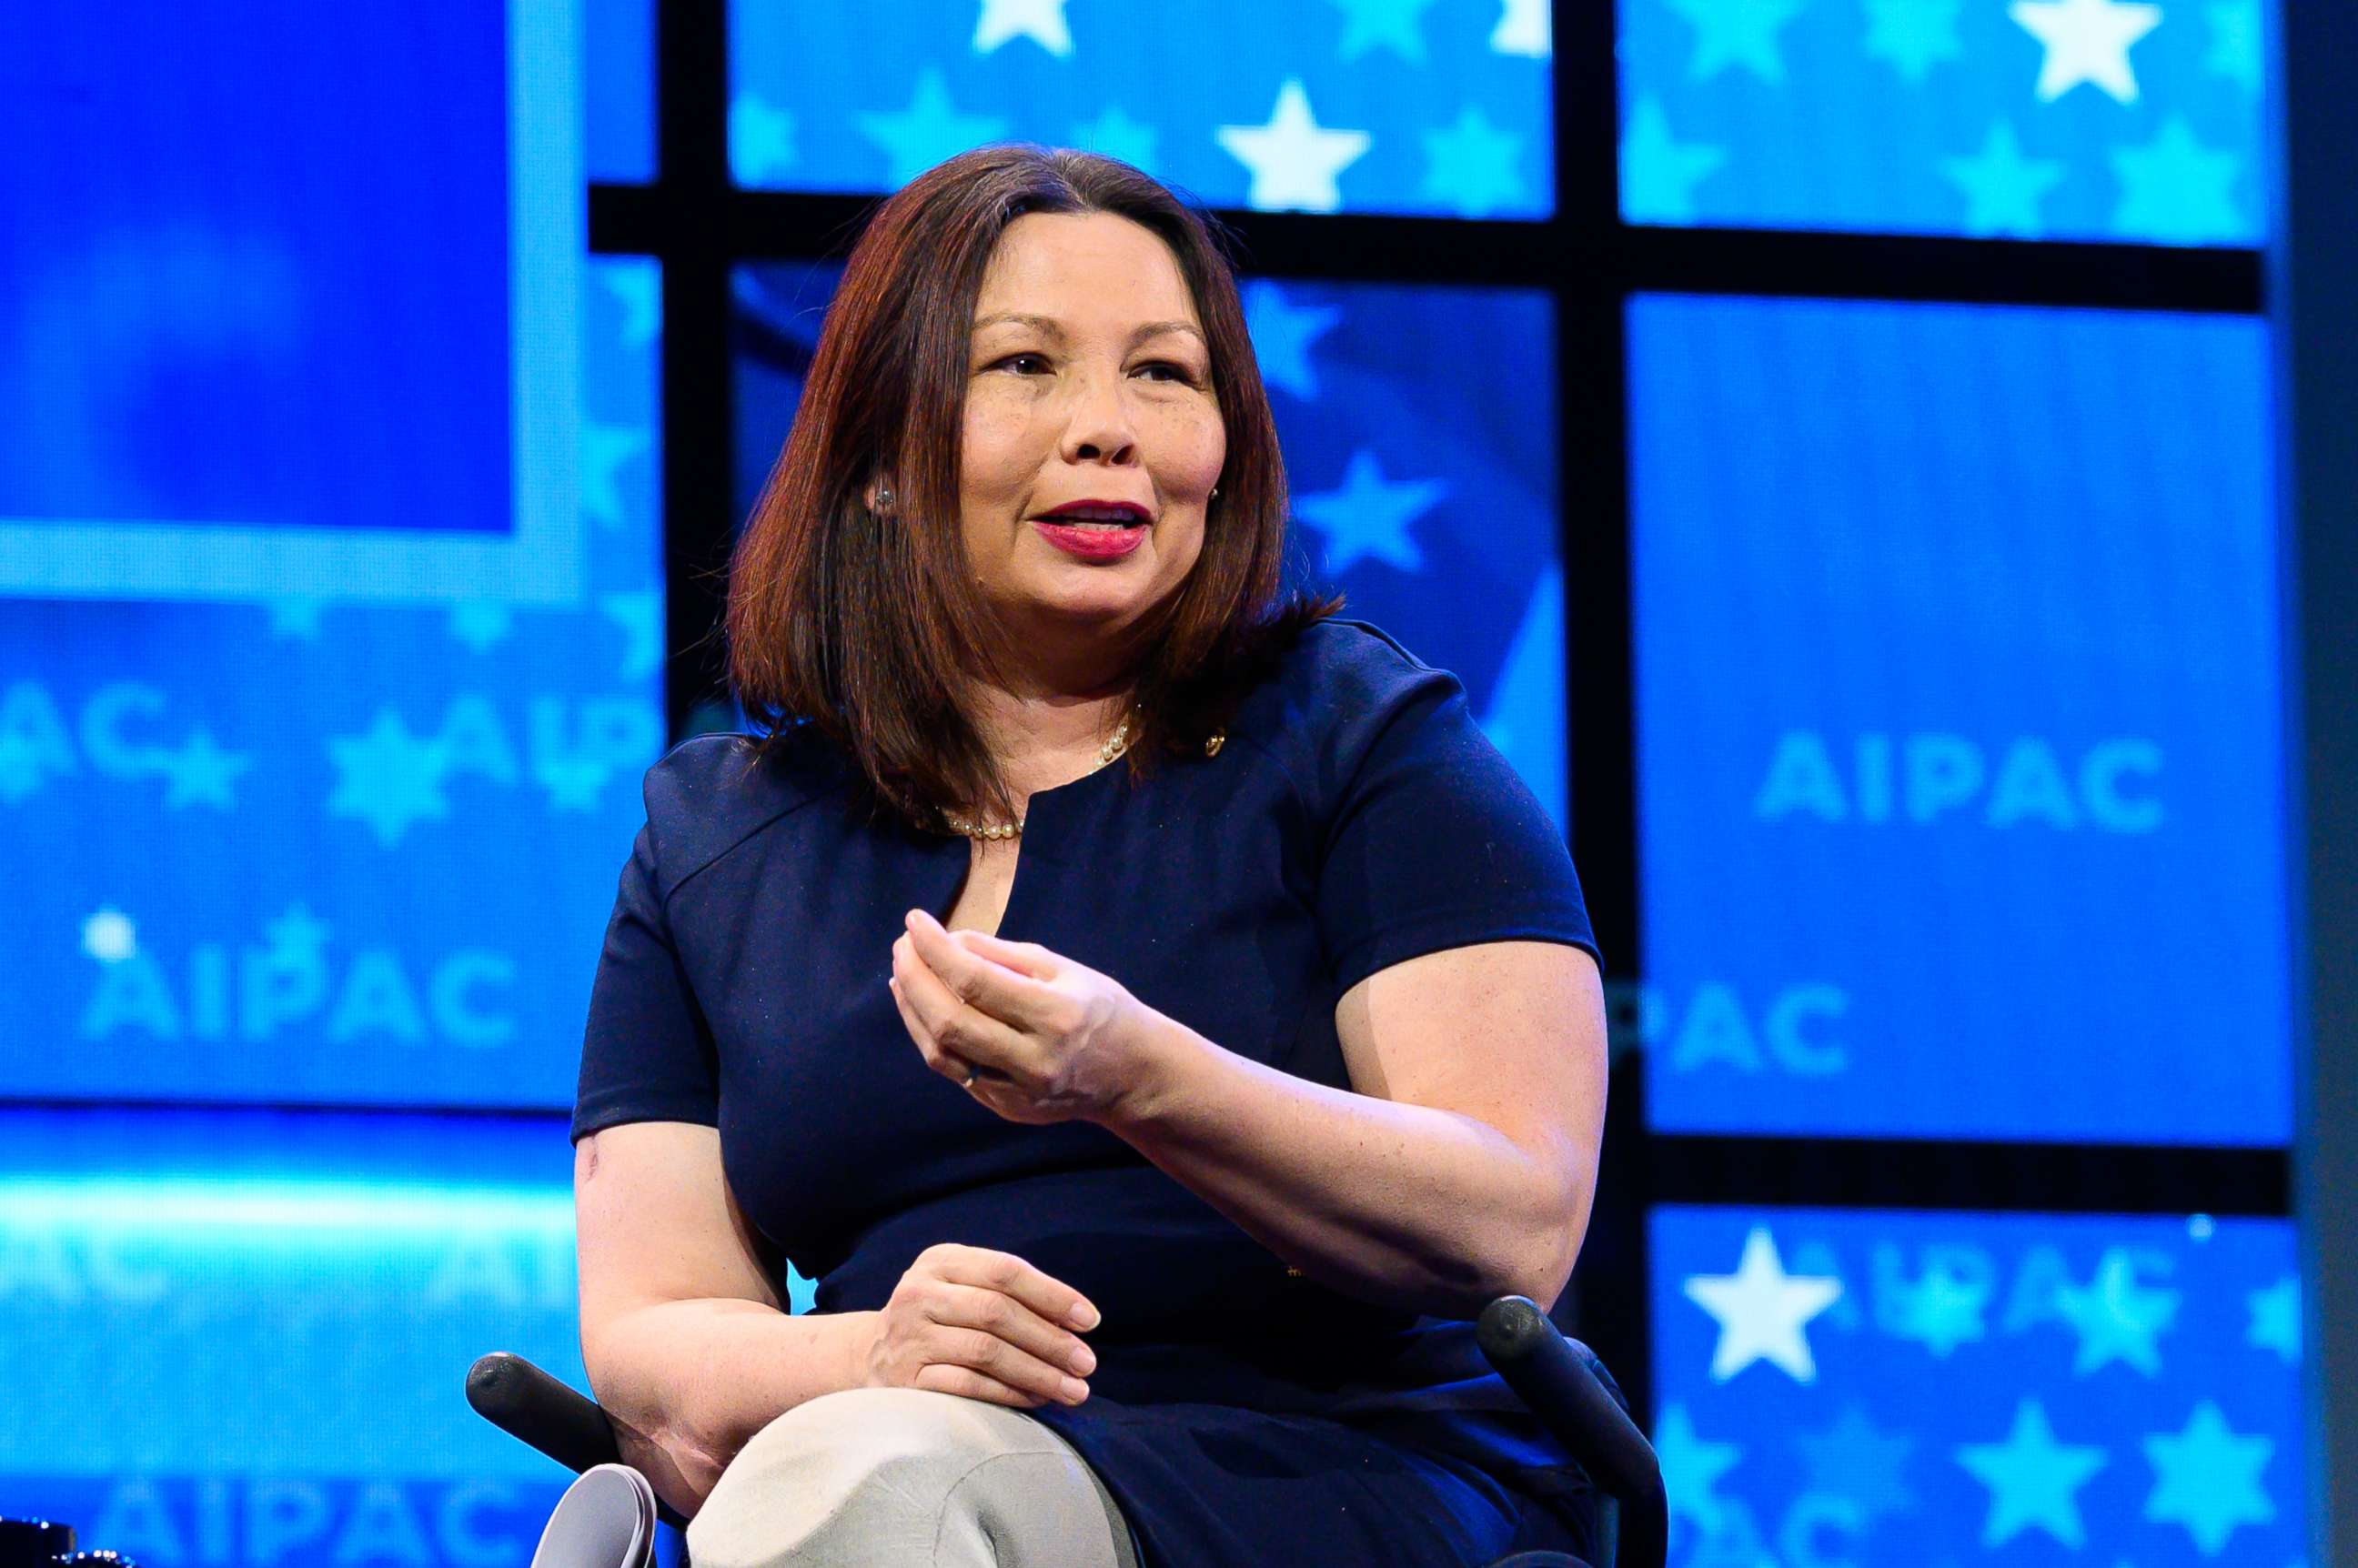 PHOTO: U.S. Senator Tammy Duckworth speaks during the American Israel Public Affairs Committee (AIPAC) Policy Conference in Washington, DC.